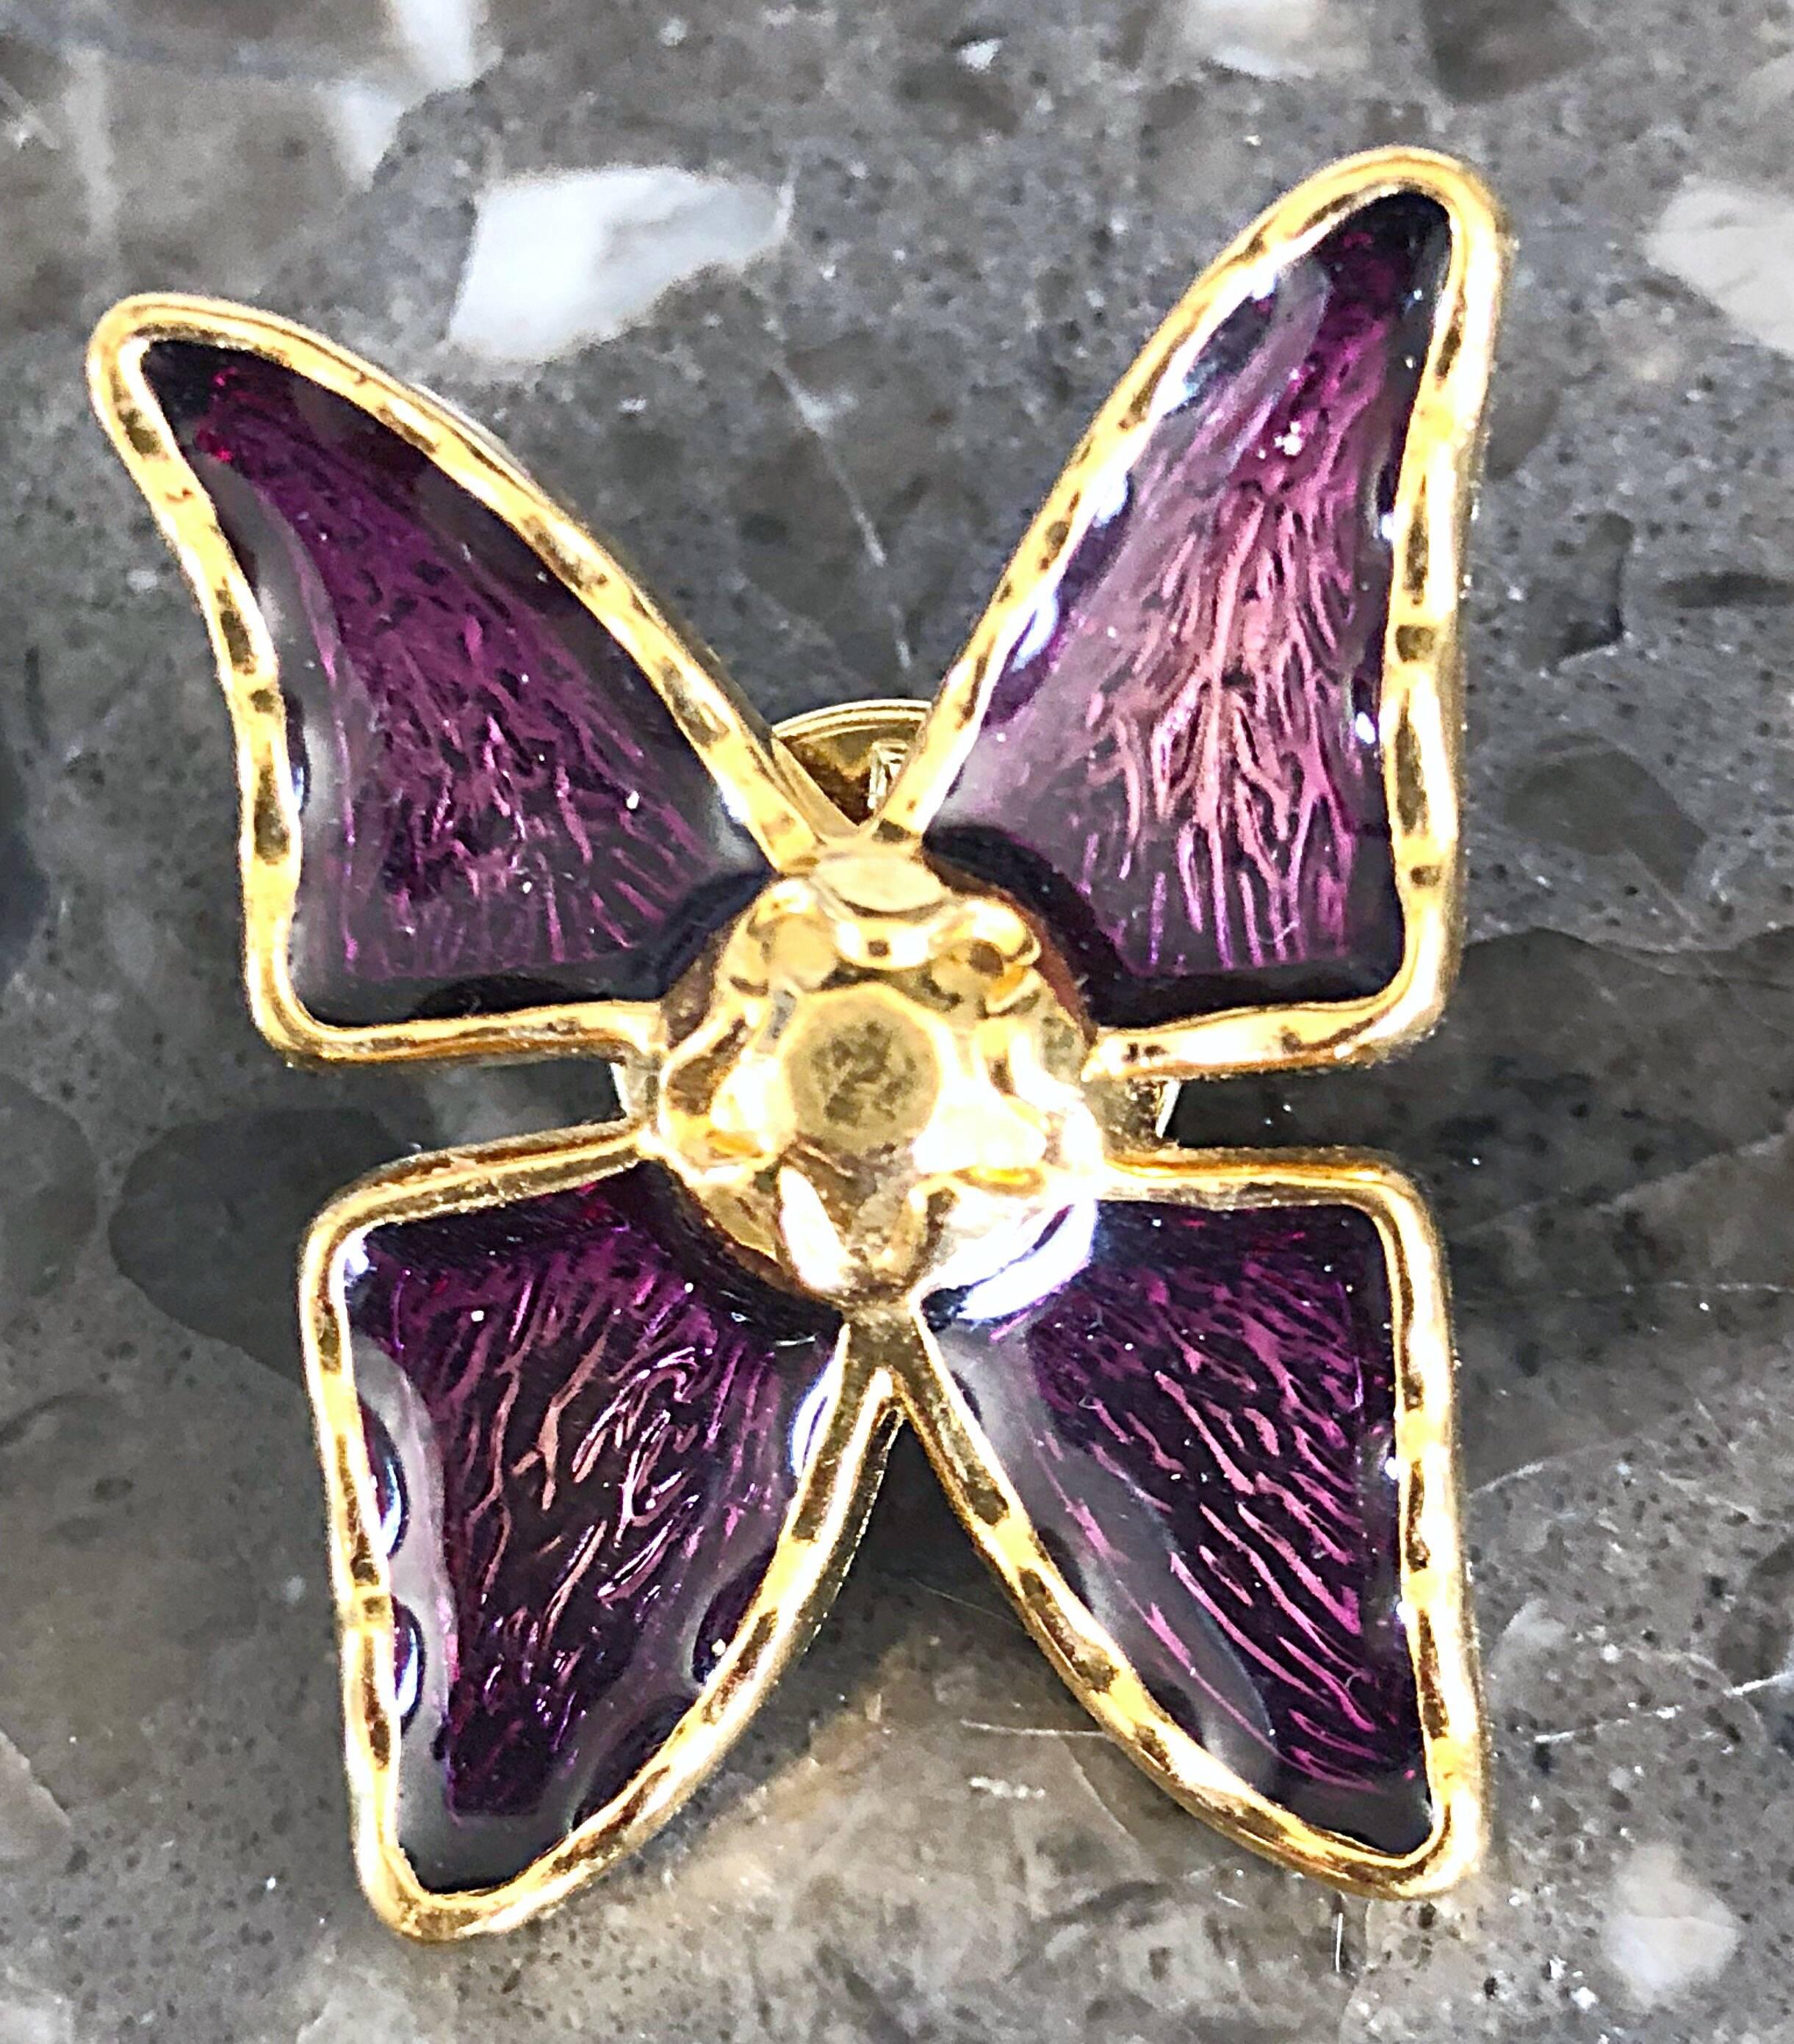 Add a little something to any outfit with this vintage 
YVES SAINT LAURENT purple and gold brooch pin! Features a beautiful regal jewel tone. In great condition. Made in France